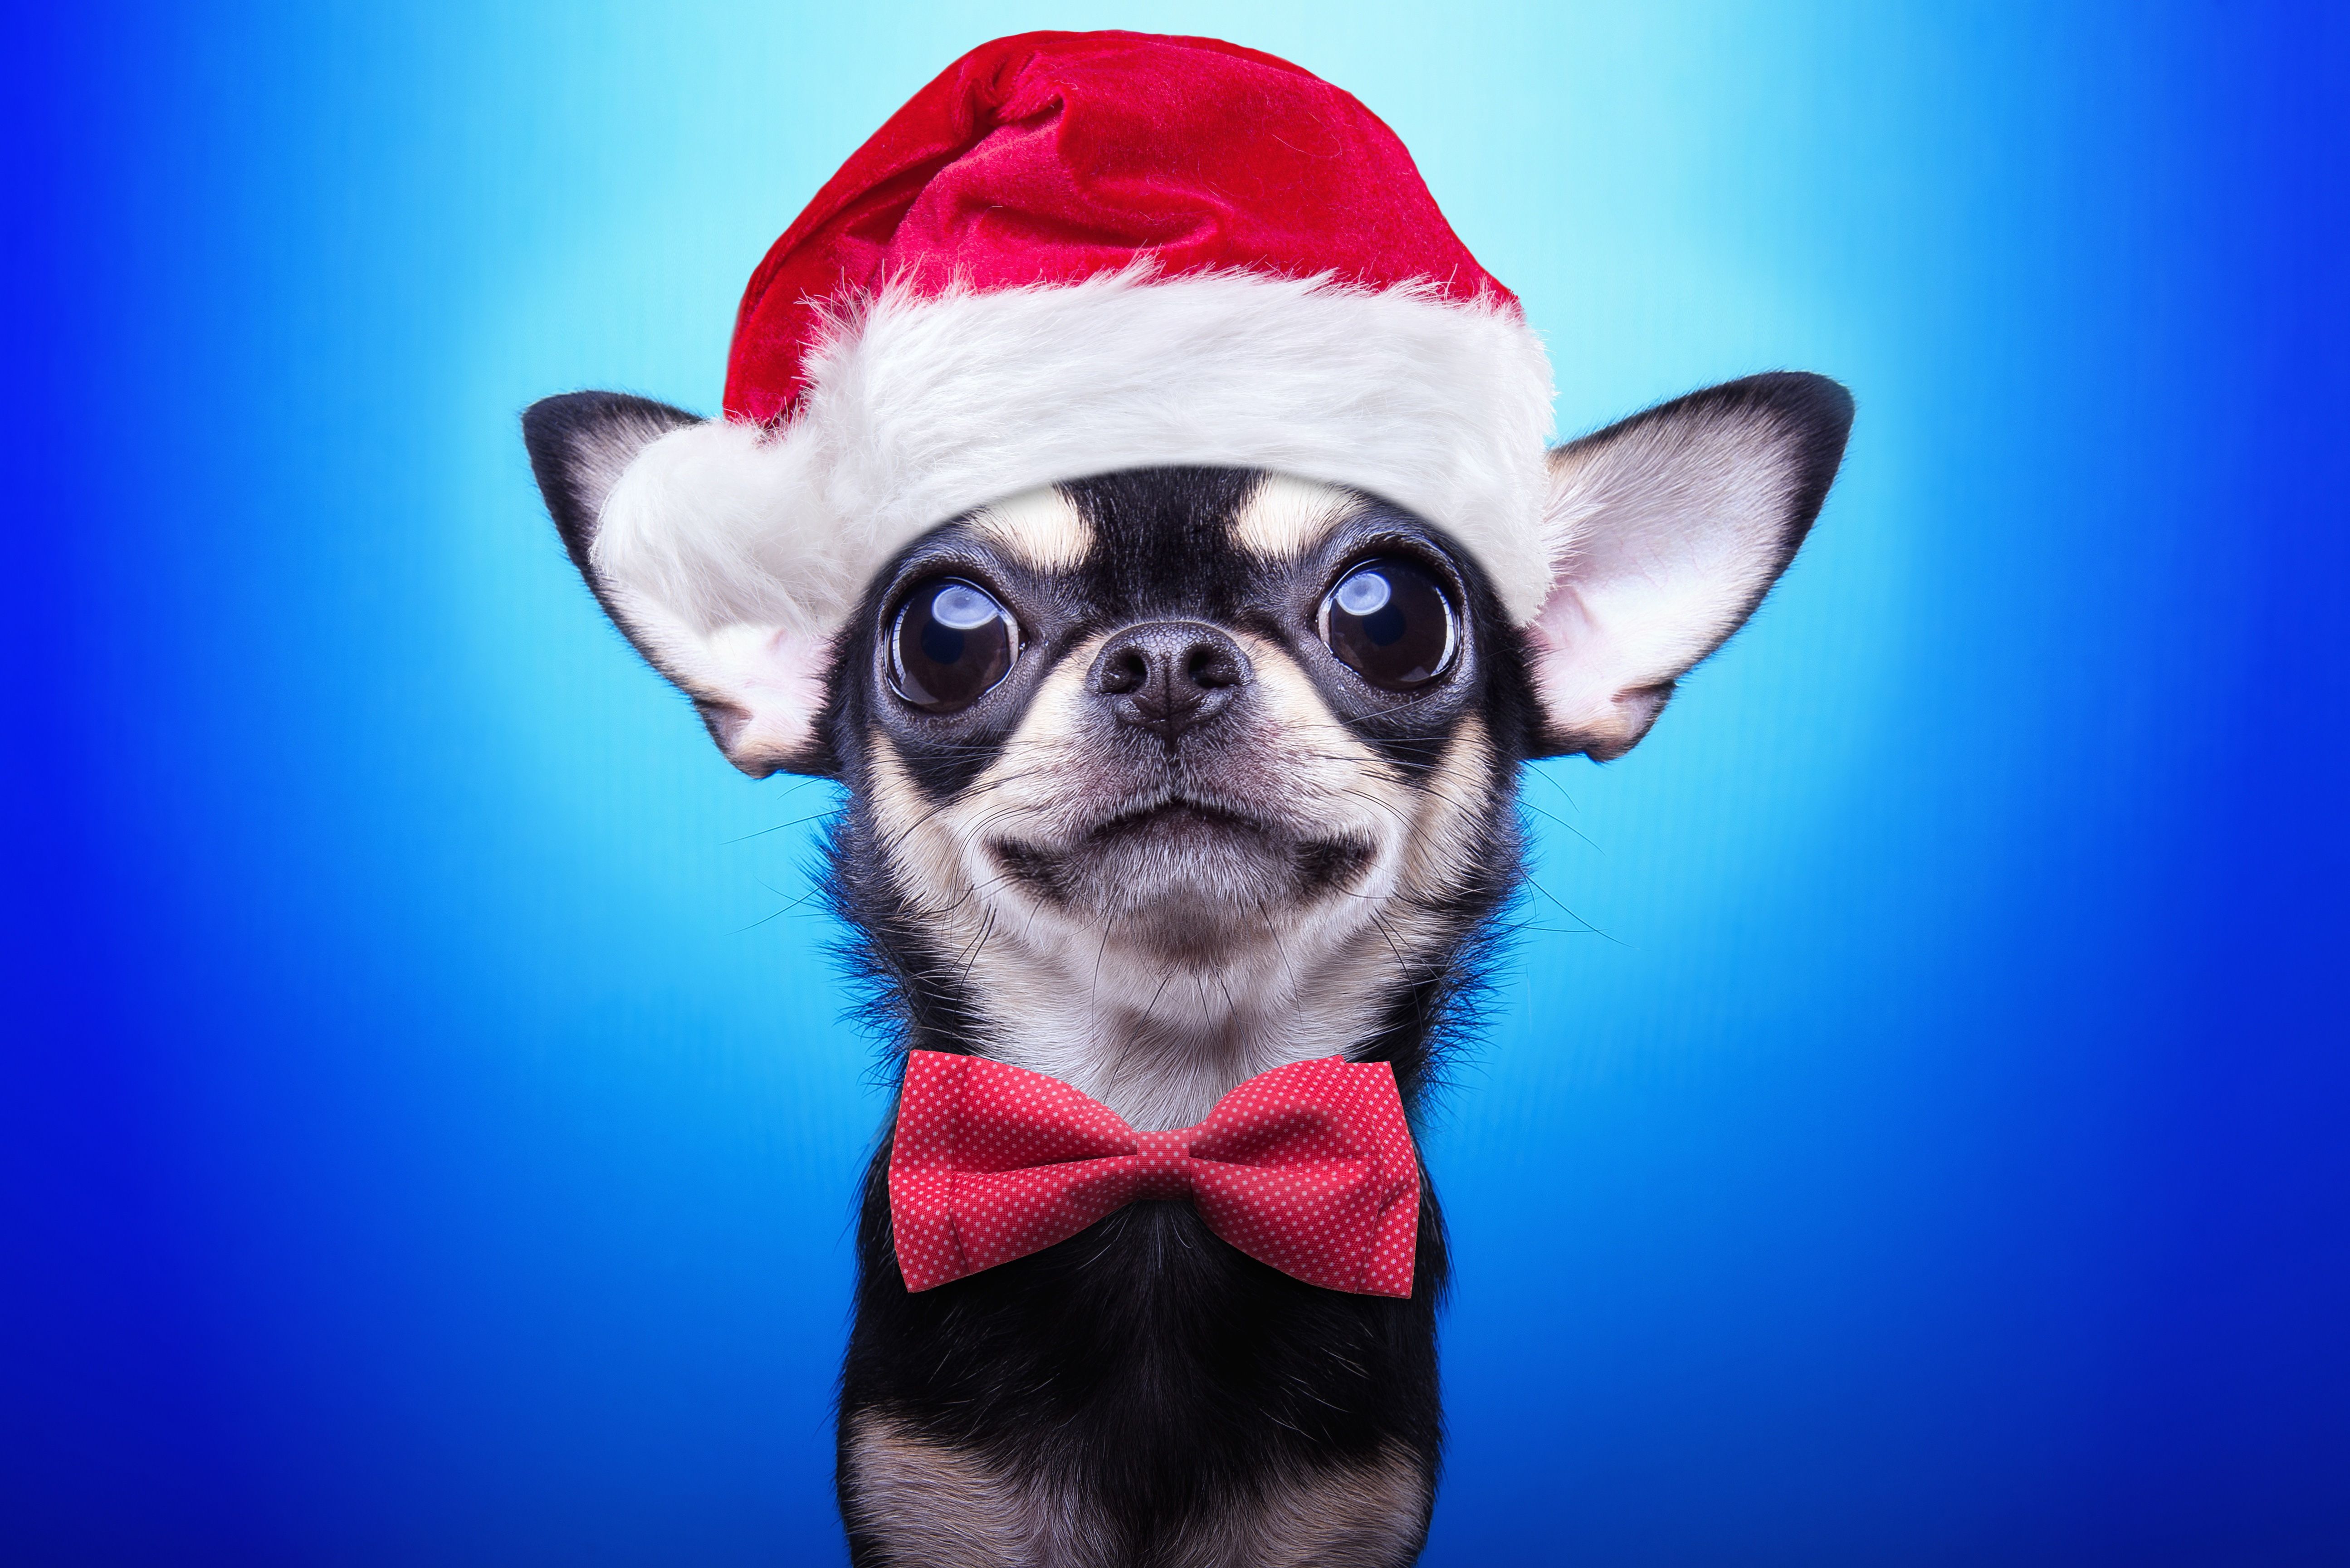 Christmas Puppy, HD Animals, 4k Wallpaper, Image, Background, Photo and Picture